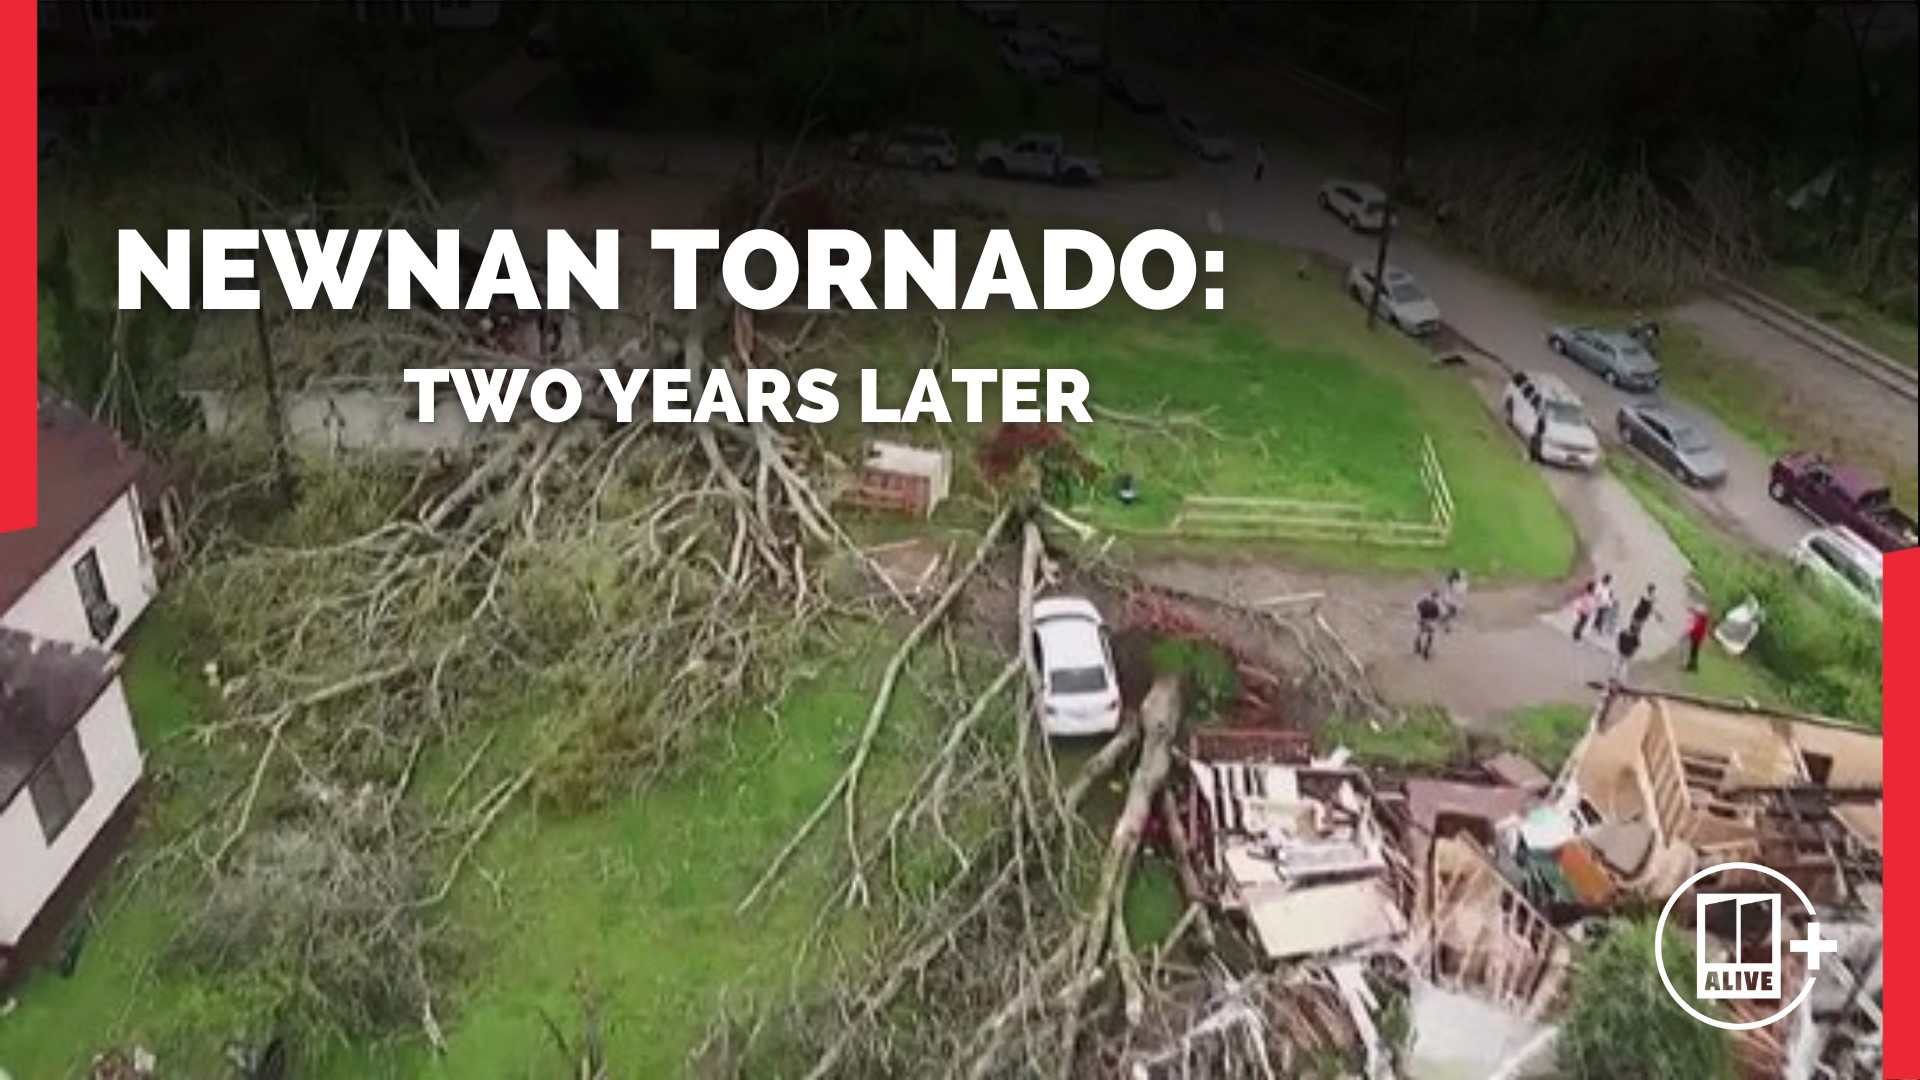 In the overnight hours of March 25 and 26, 2021, an EF-4 tornado tore through Heard, Coweta and Fayette counties.